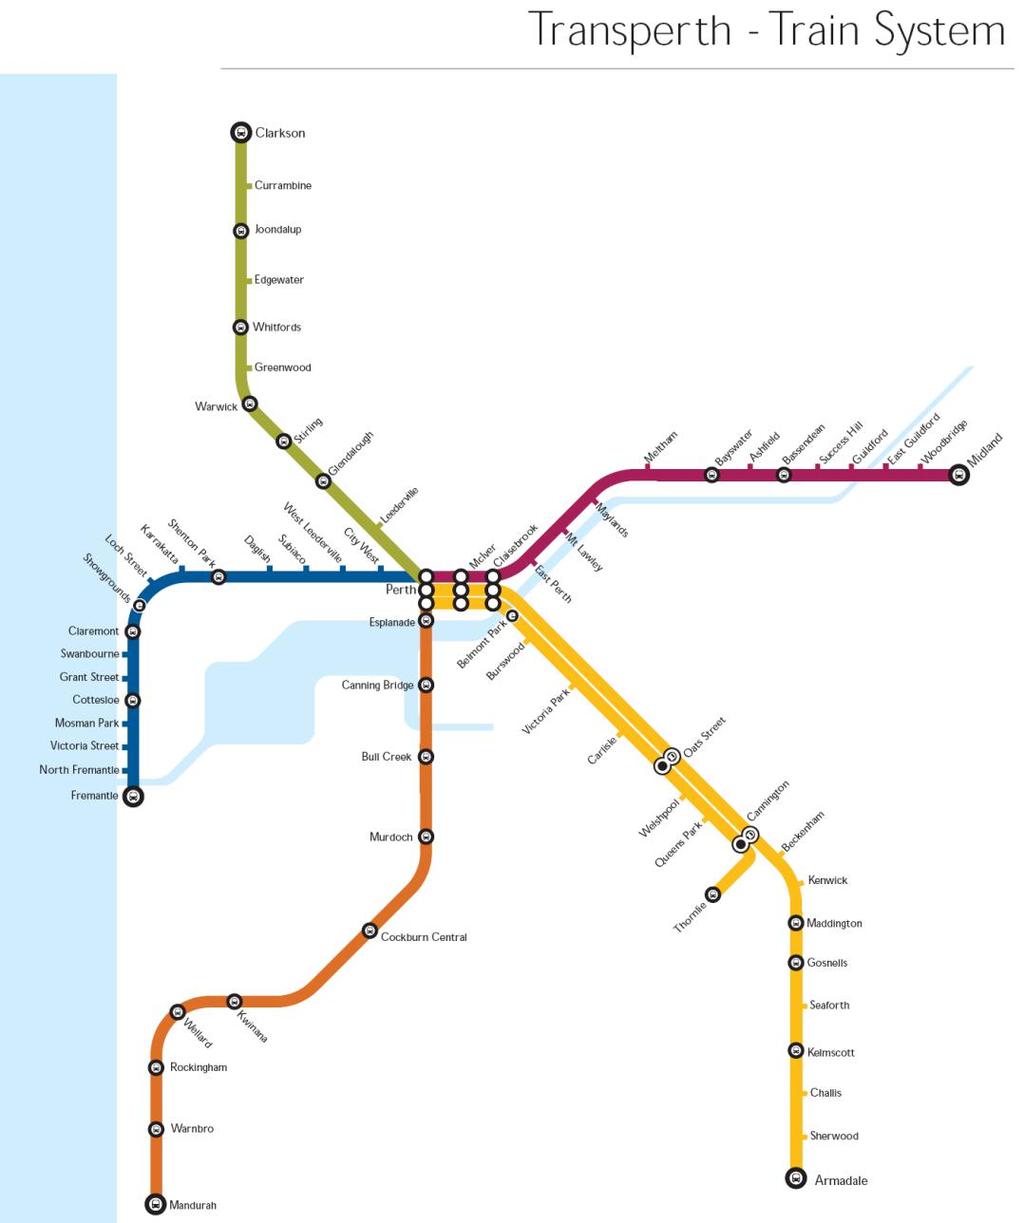 Perth Hub of Transport Network > 5 rail lines > Numerous bus services > Good